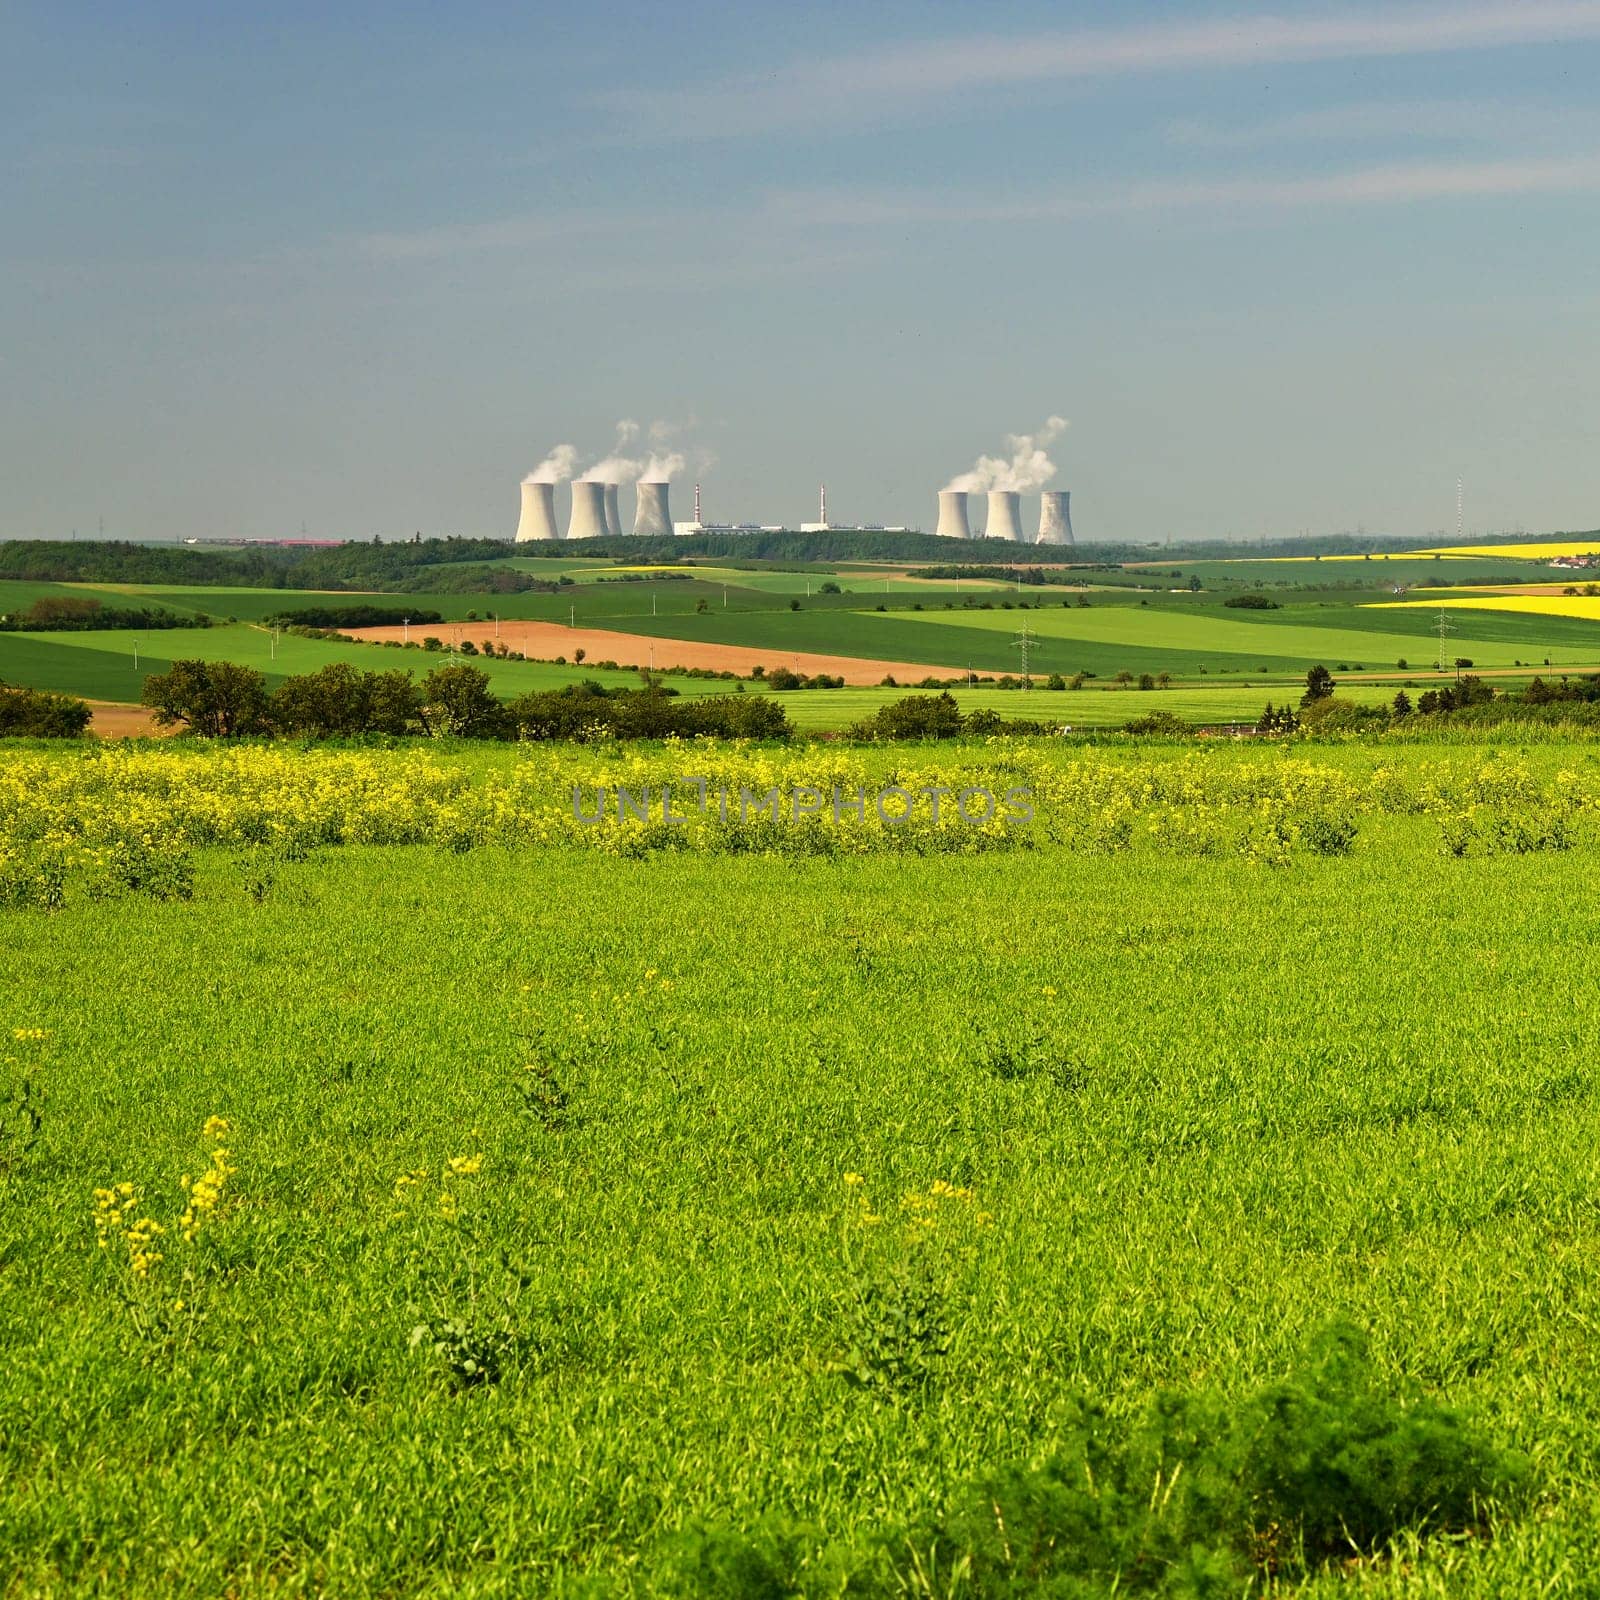 Dukovany nuclear power plant.
Blooming meadows and fields, beautiful spring landscape in the Czech Republic.